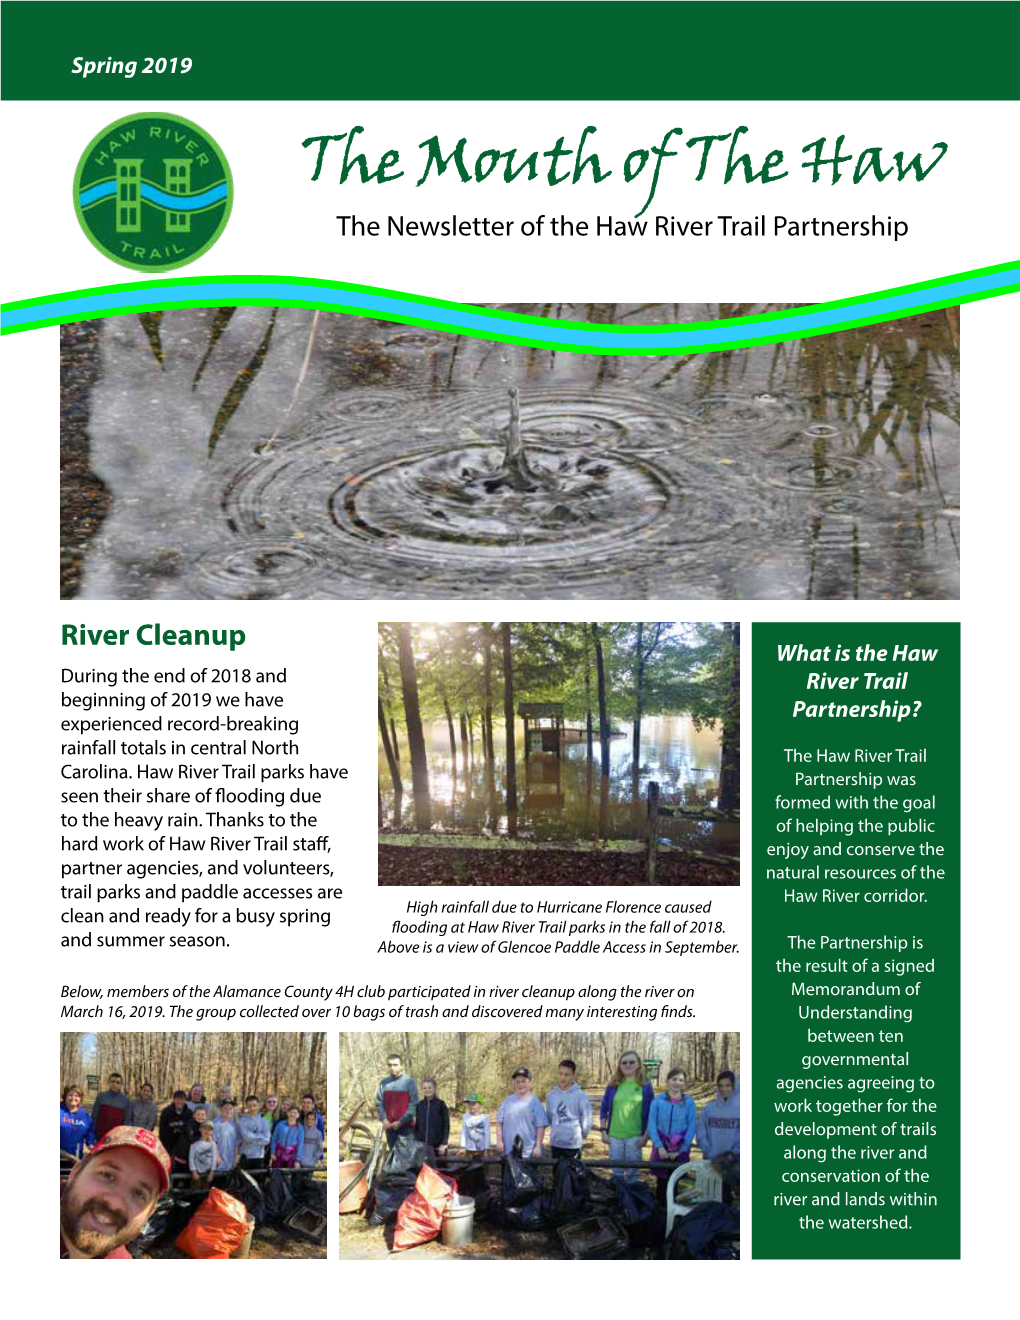 The Mouth of the Haw the Newsletter of the Haw River Trail Partnership